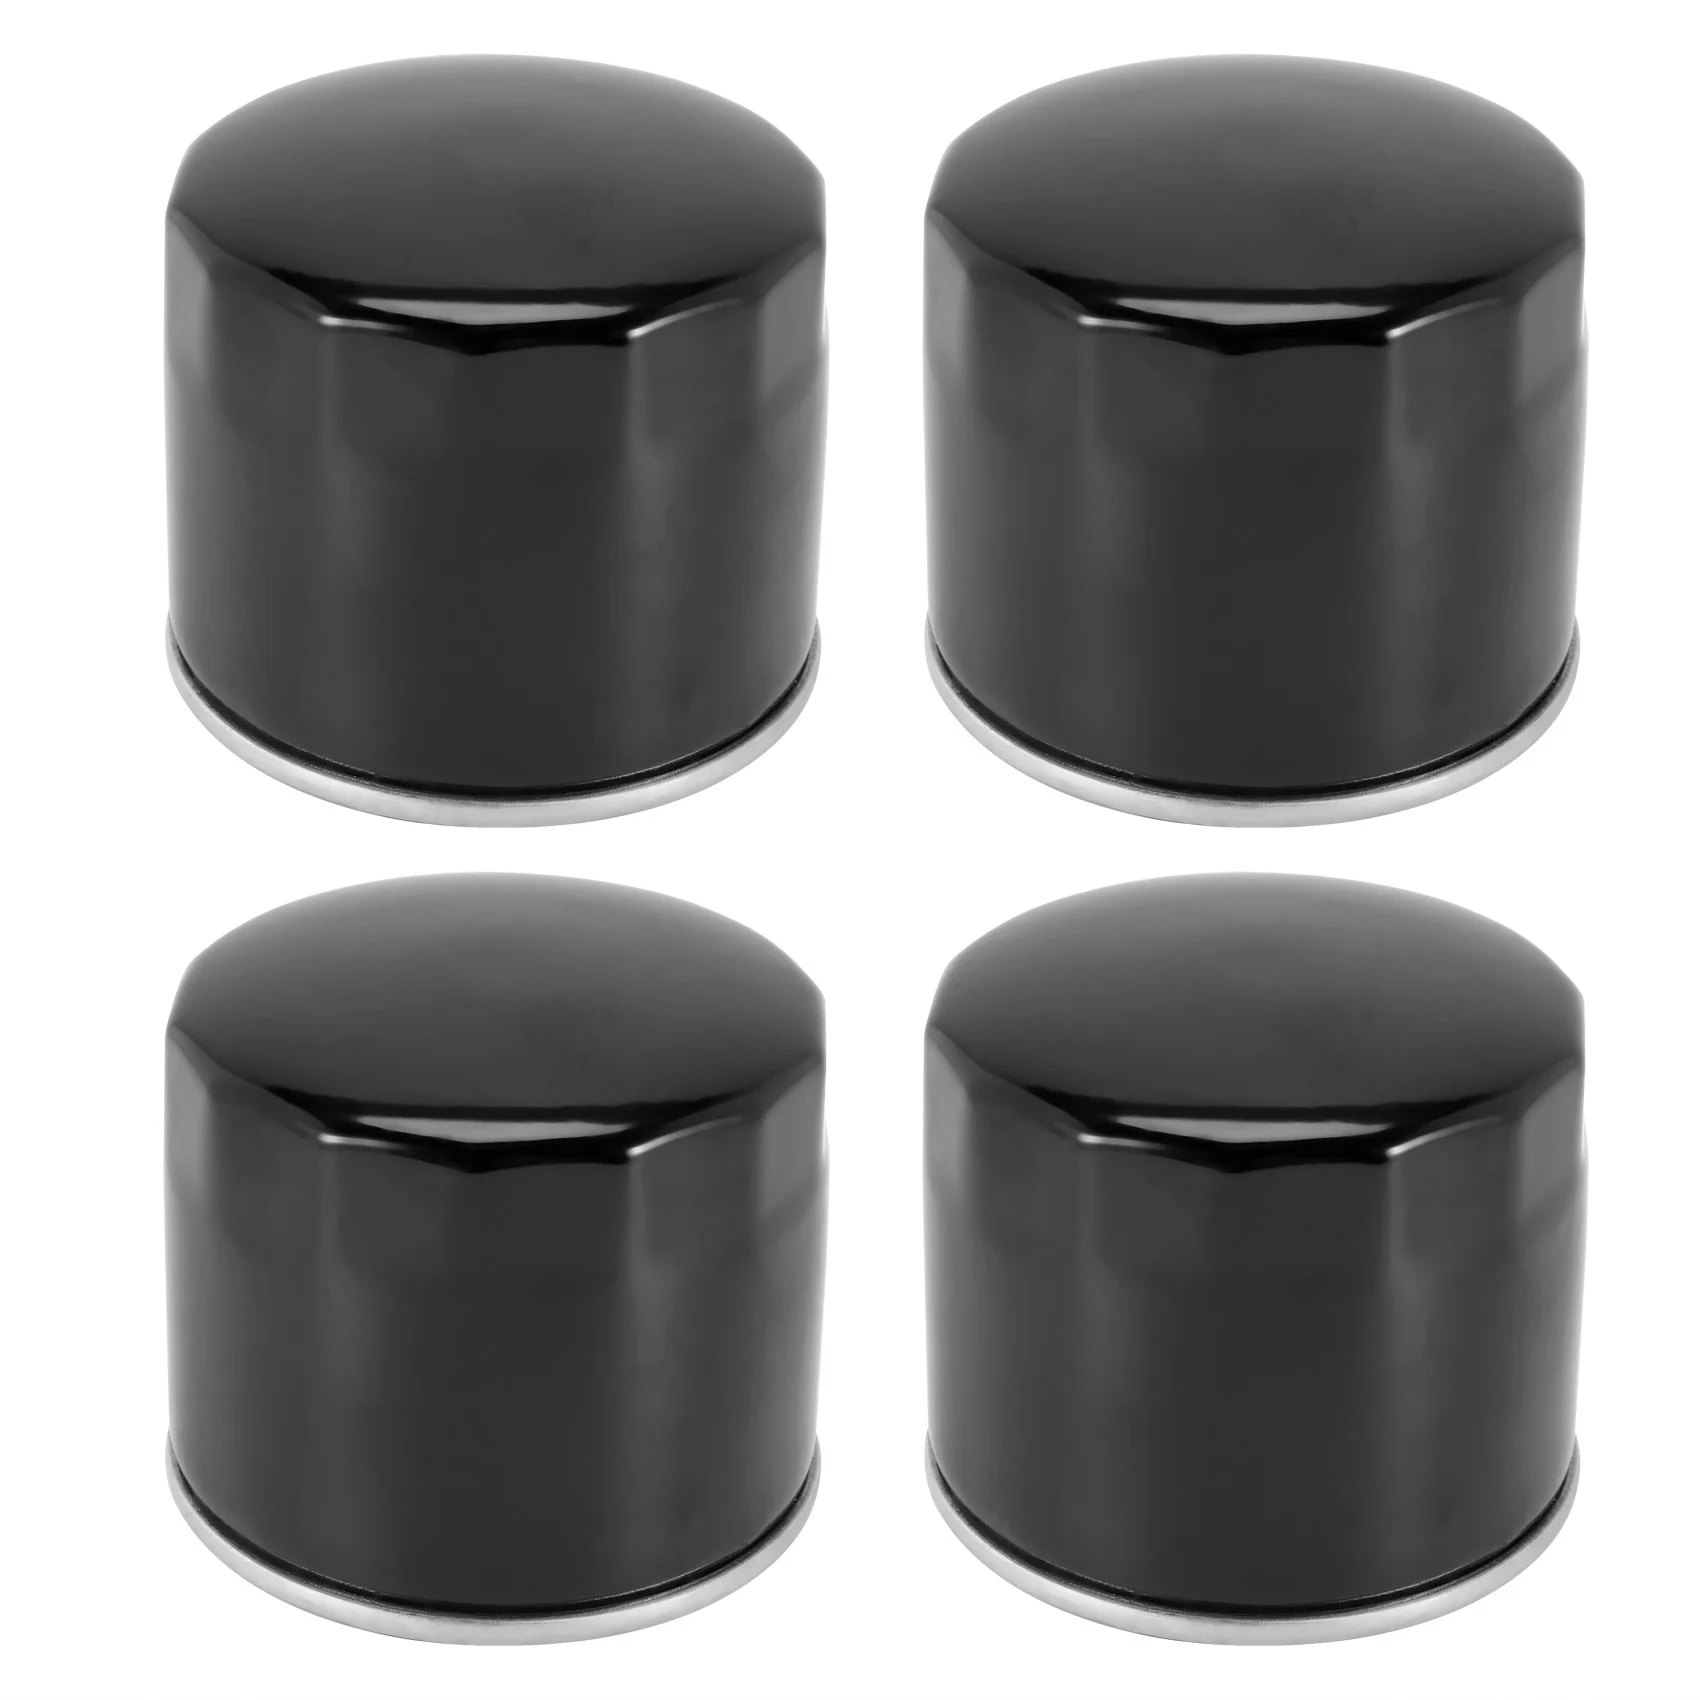 

4 Pcs Oil Filters For Briggs & Stratton 492932,492932S,695396,696854 Lawn Mower Replacement Parts